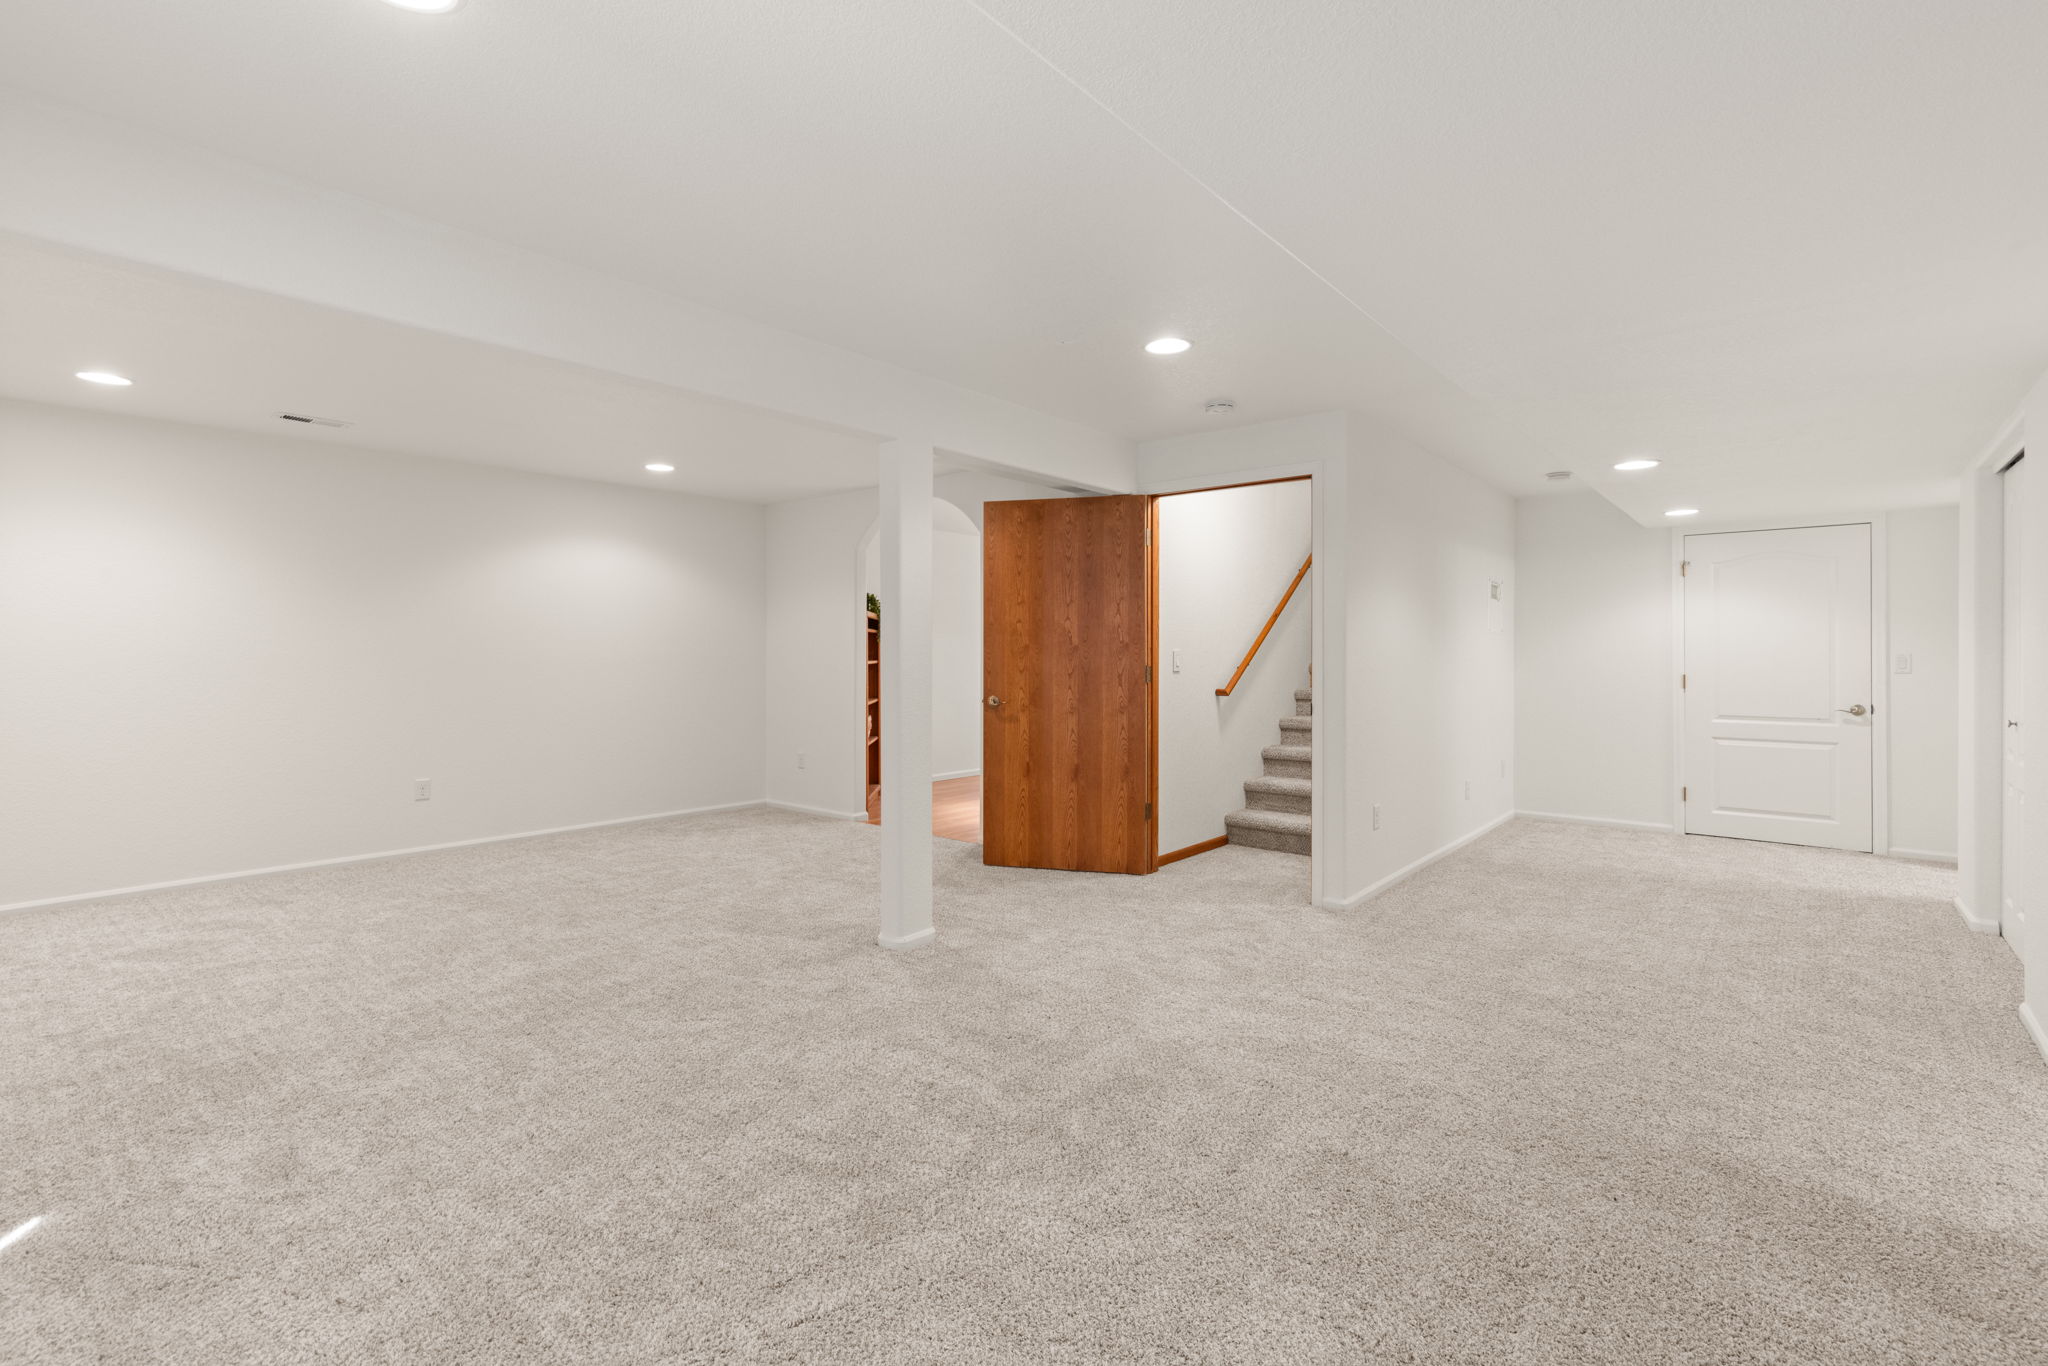 Plenty of Room for Games, Exercise Equipment or Theater Room